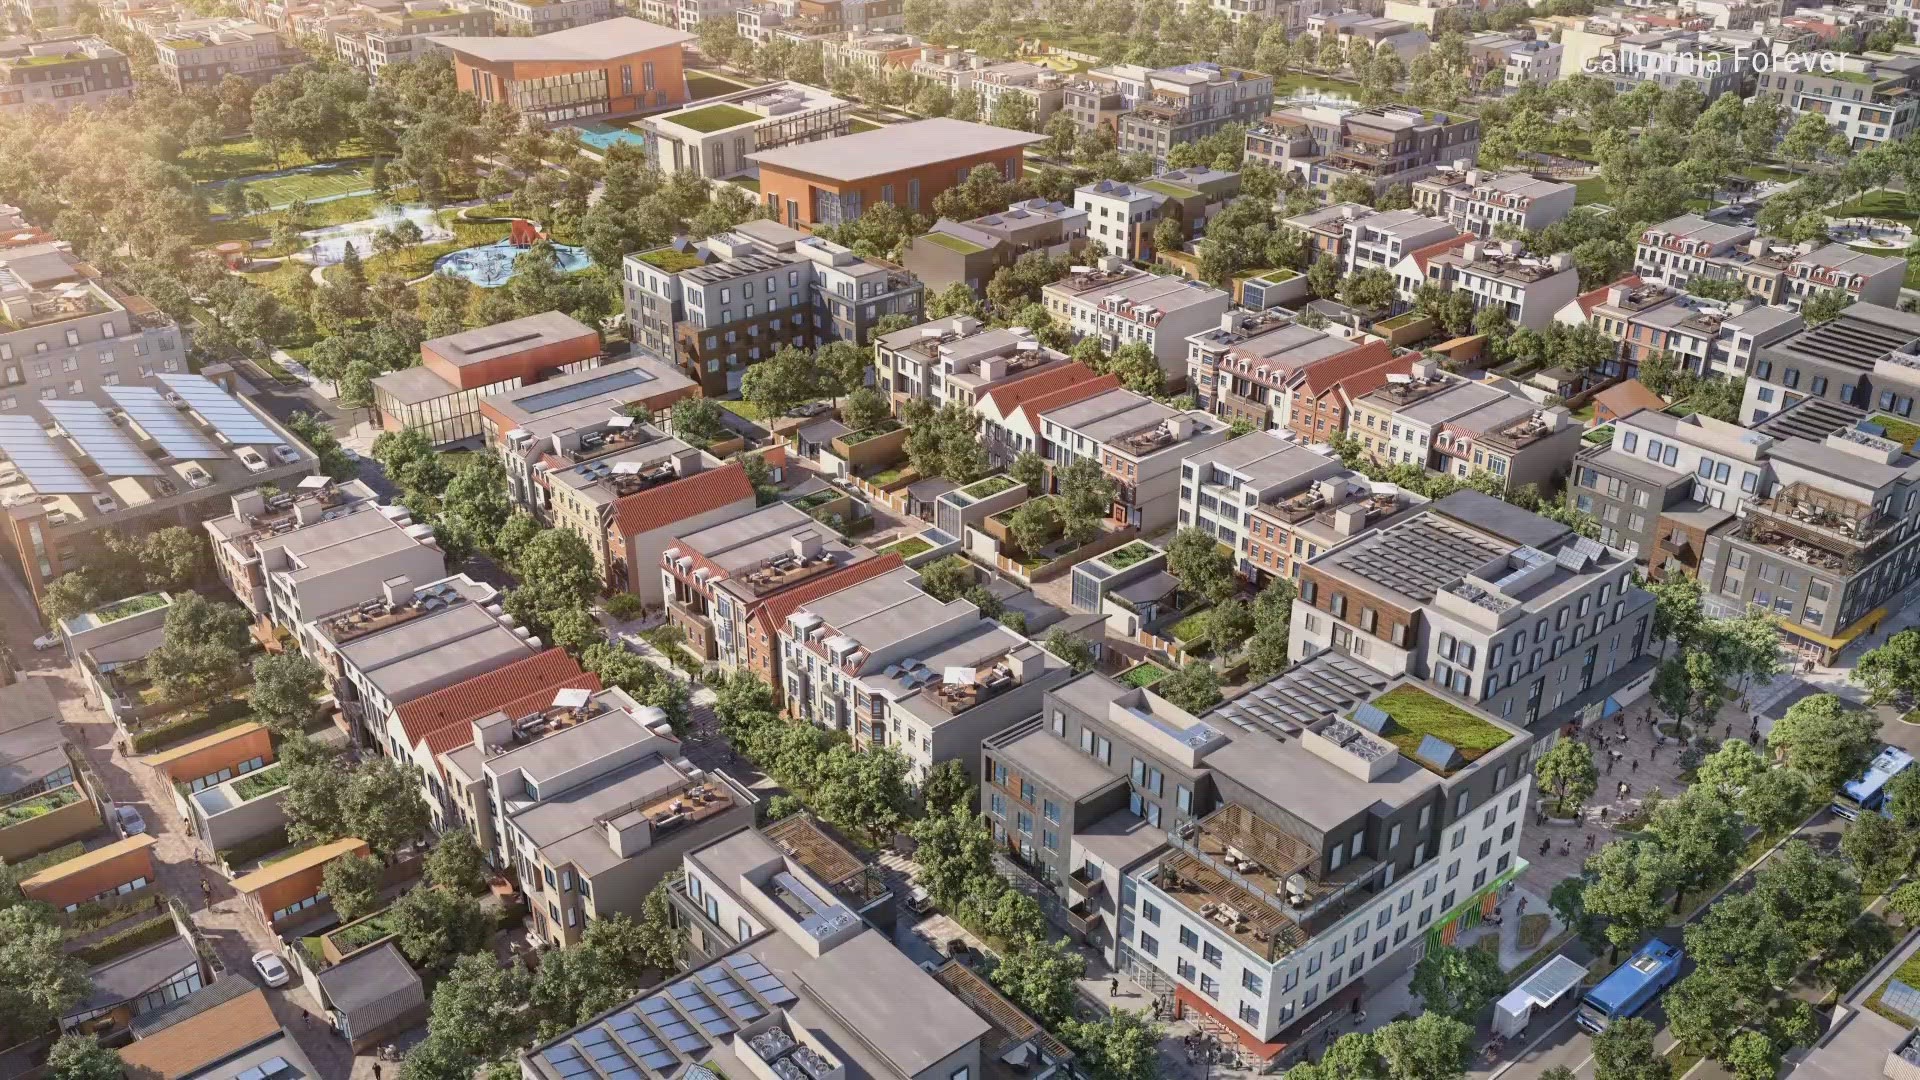 Silicon Valley Giants Plan New City in California: Could This Be the Future of Urban Living?